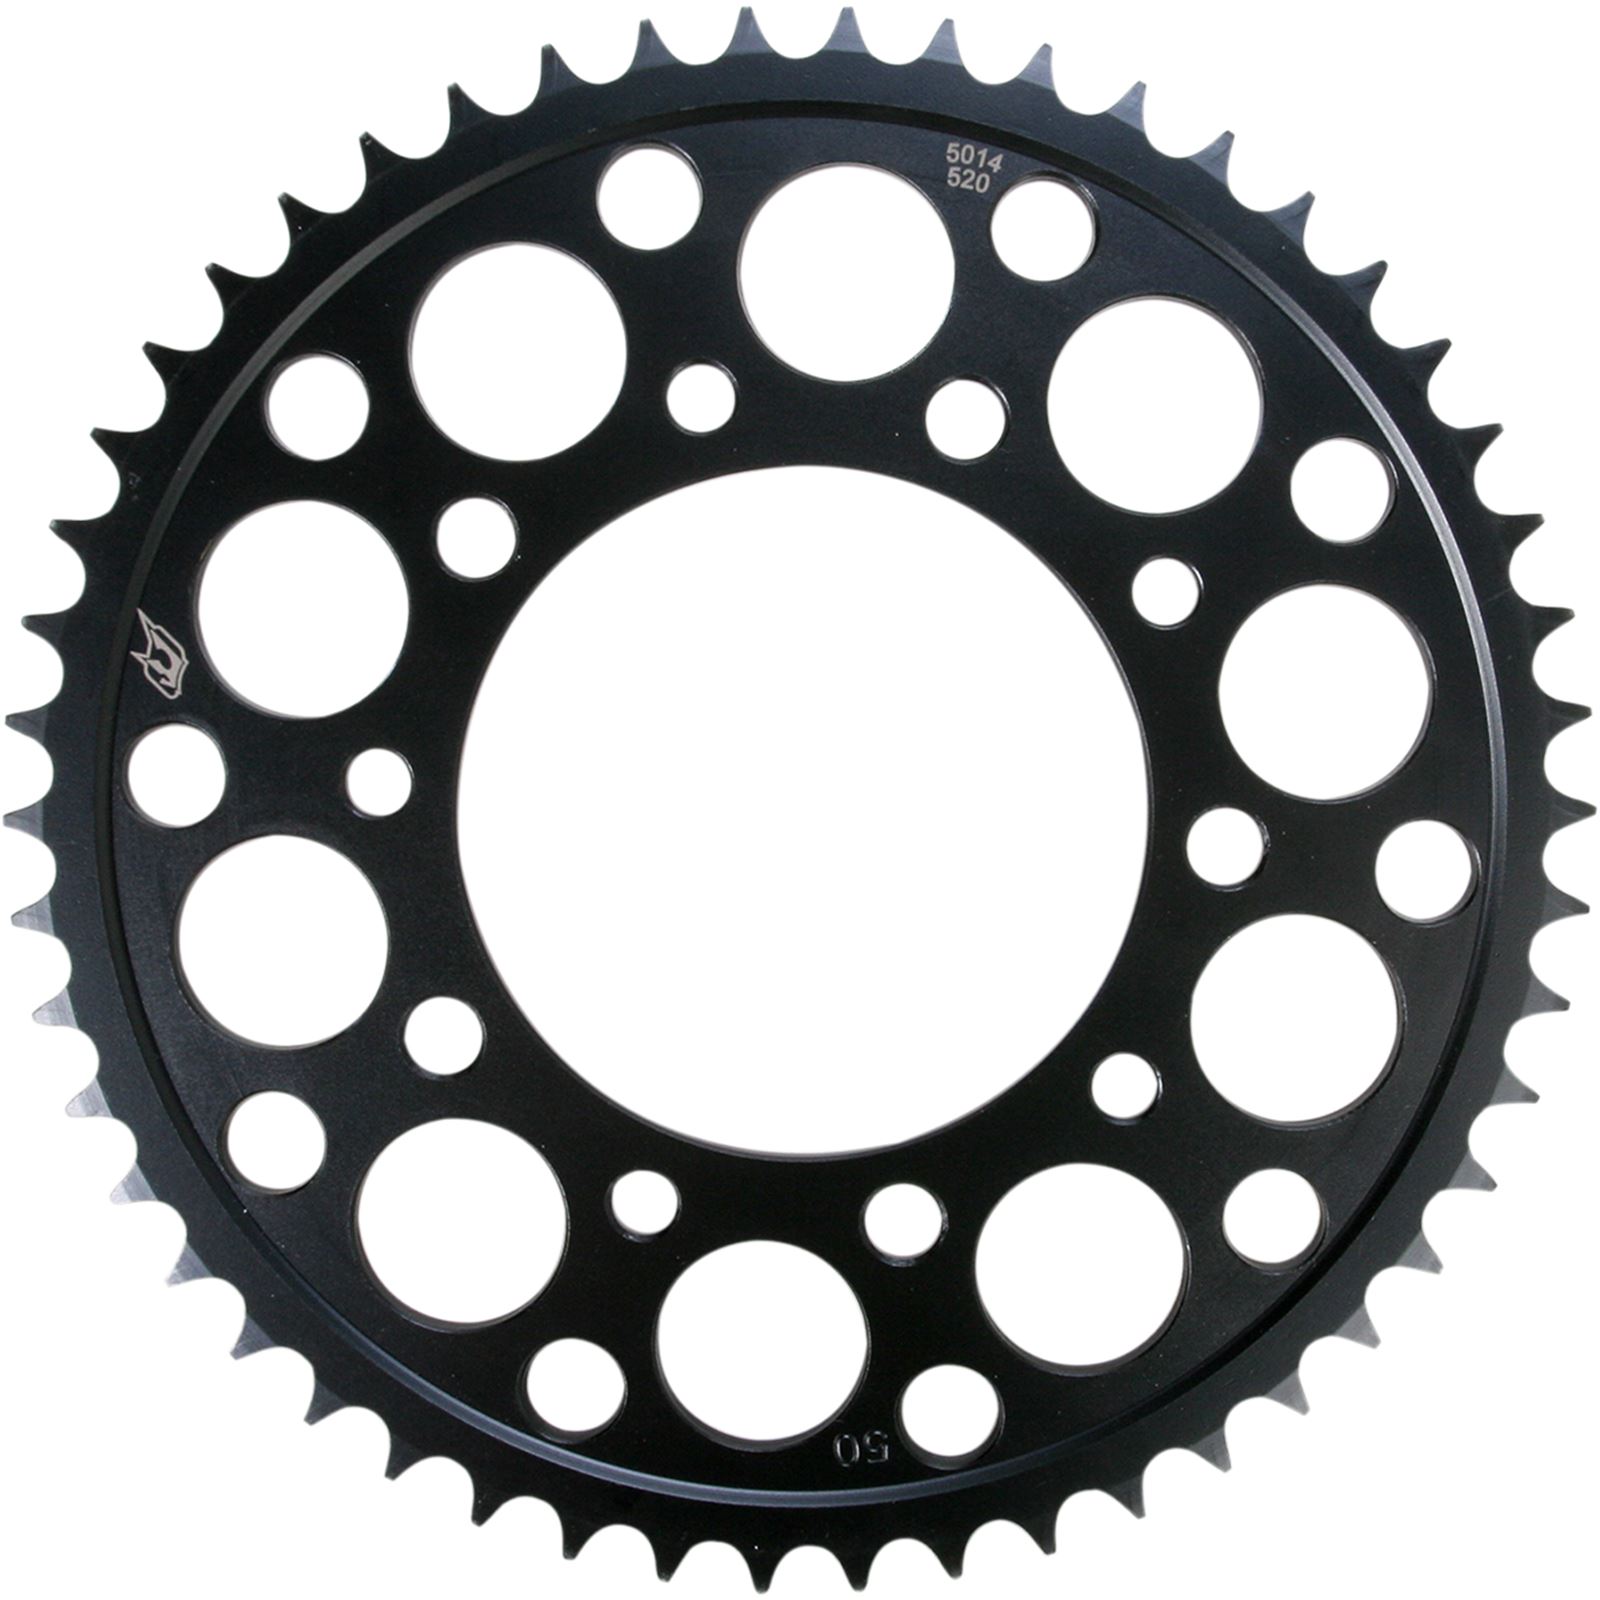 Driven Rear Sprocket - 50-Tooth